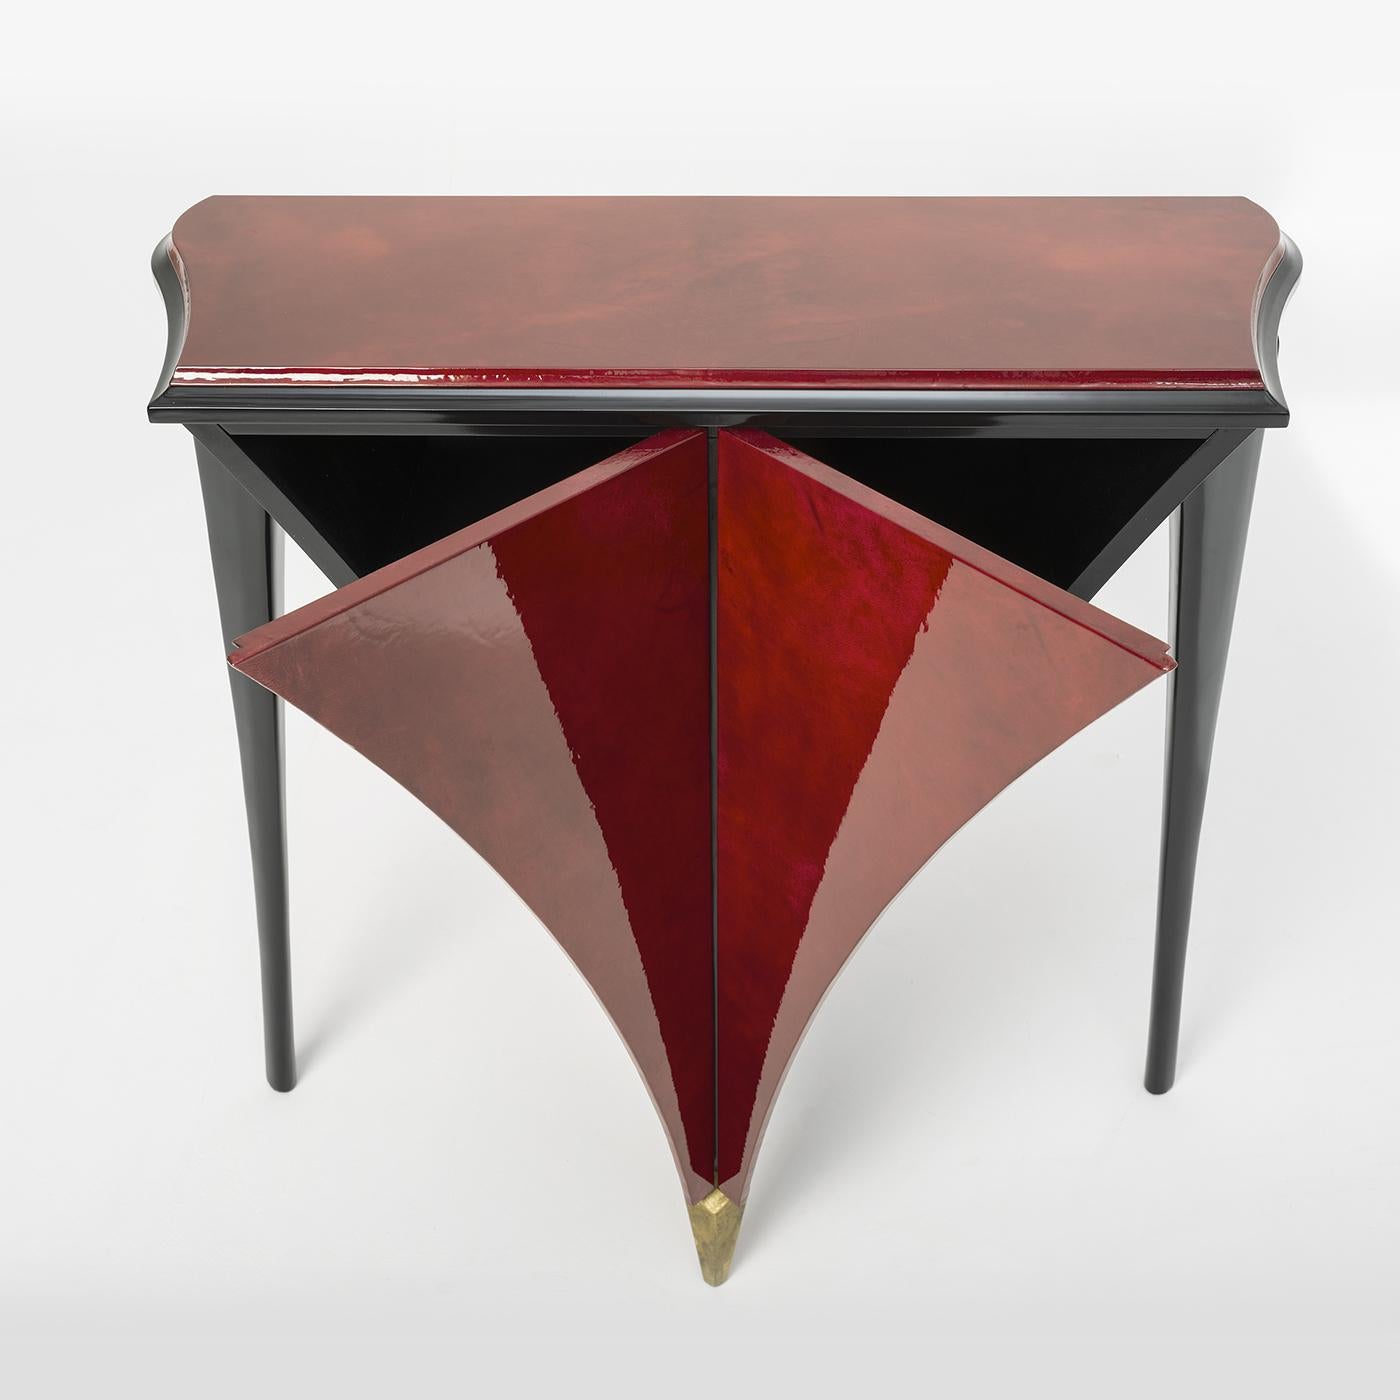 Stylish and unique in design, the Liù console table features a central part and top in gloss red goatskin parchment. The side leg and border are lacquered in matte black, while the central leg is embellished with oxidized gold leaf for a touch of